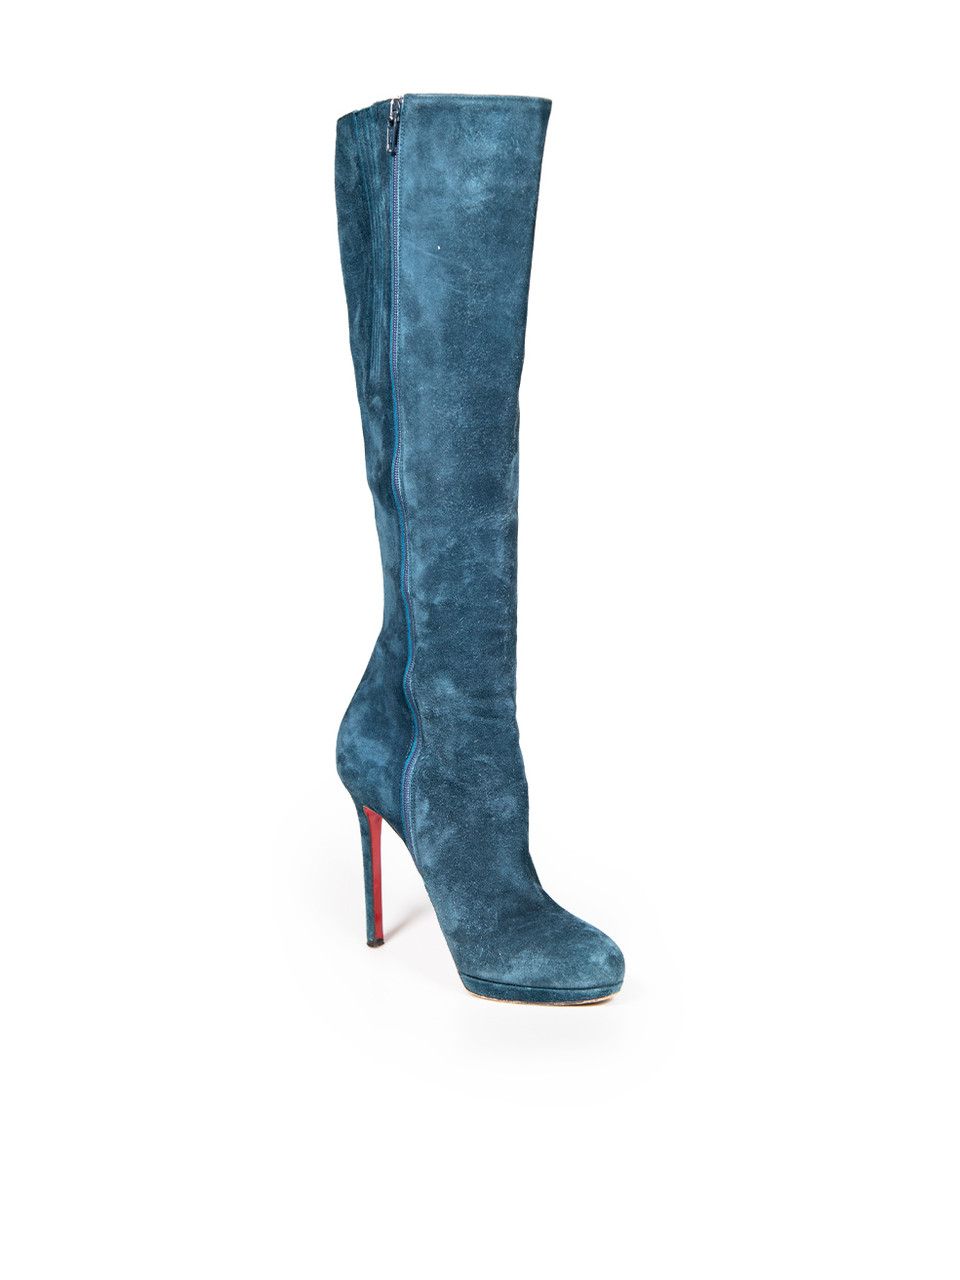 Christian Louboutin Turquoise Suede Knee High Boots